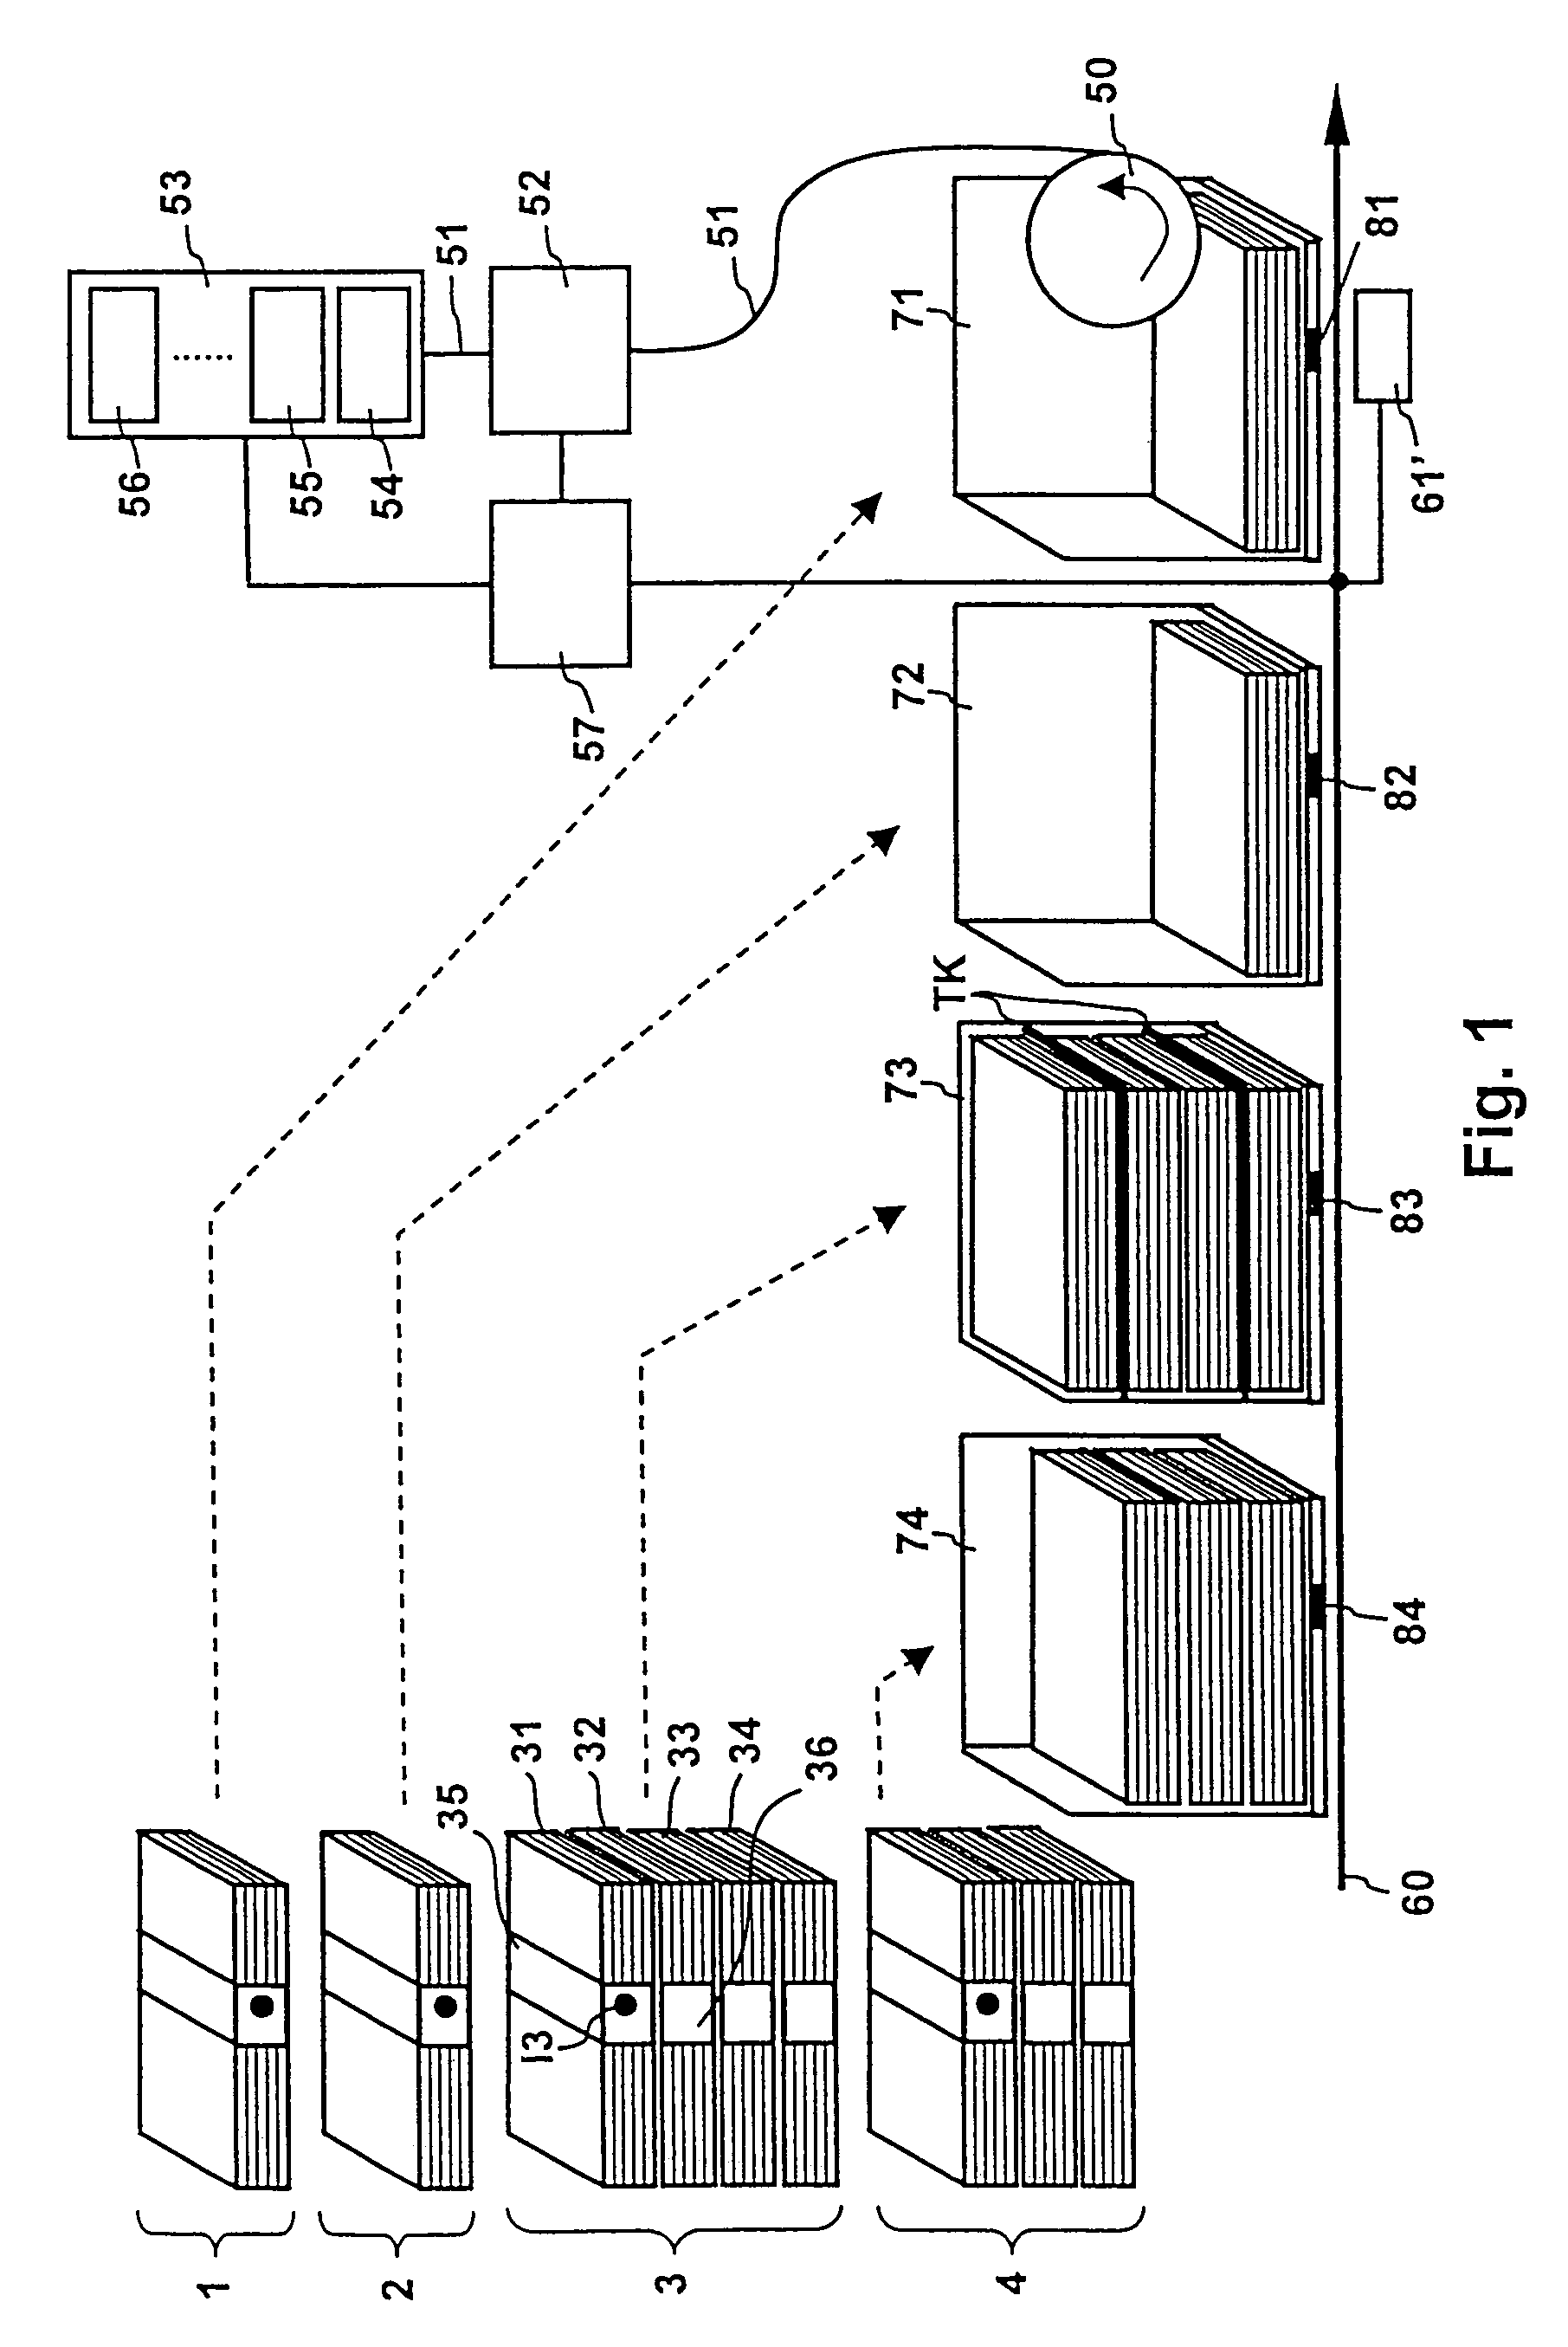 Apparatus and method for processing bank notes